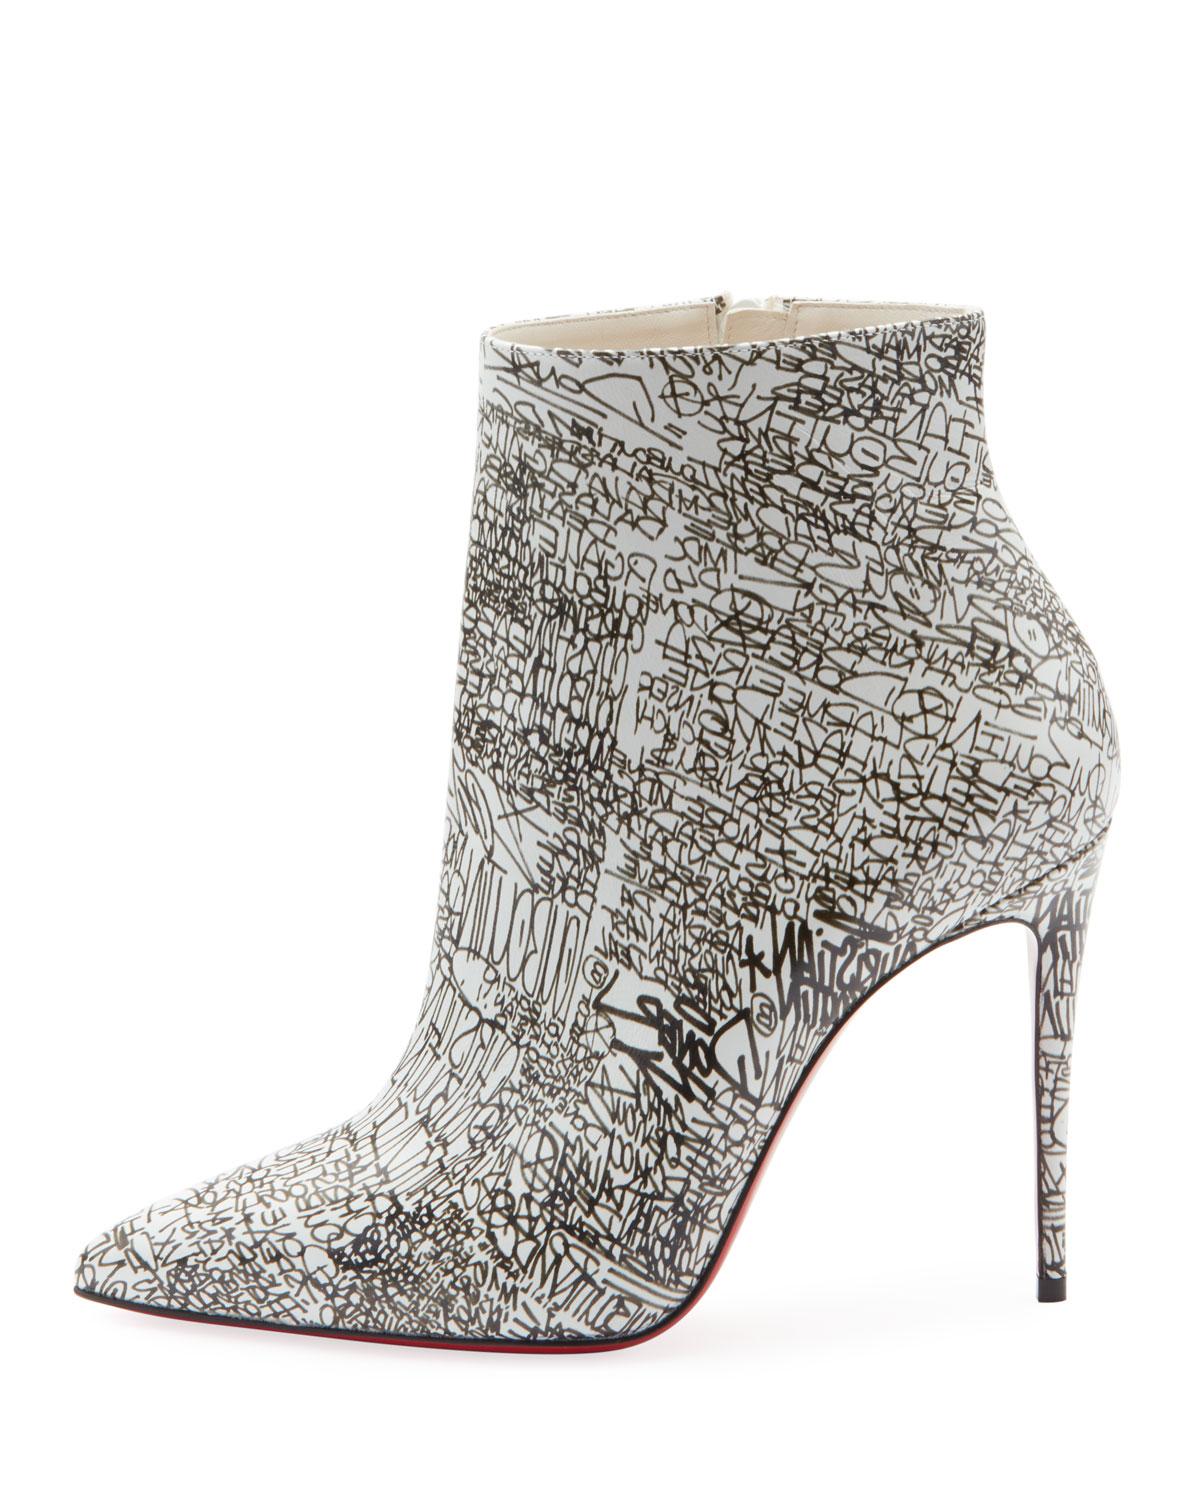 Christian Louboutin So Kate 100 Calf Caligraf Red Sole Booties in Gray ...